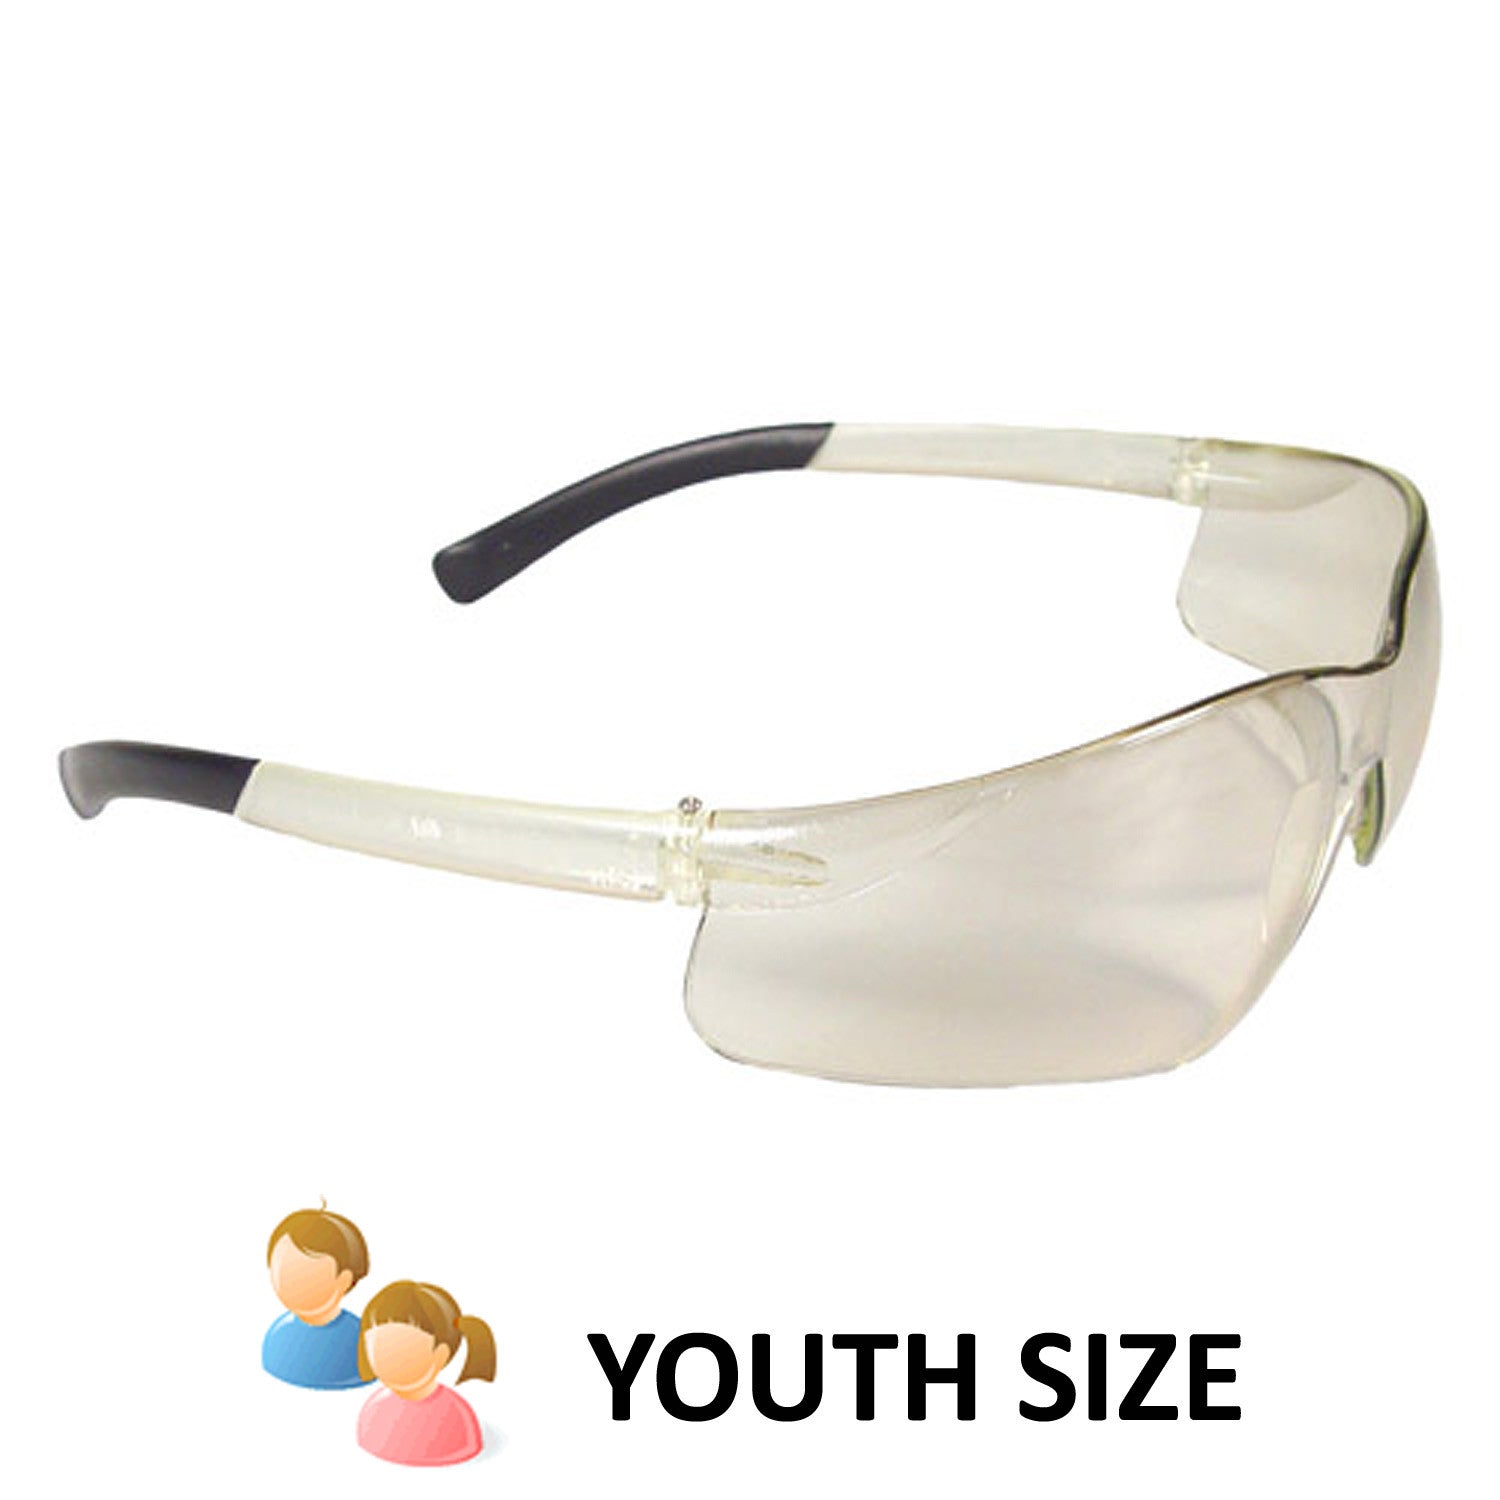 Radians - Rad-Atac Small Safety Eyewear - Clear Indoor/Outdoor Lens-eSafety Supplies, Inc